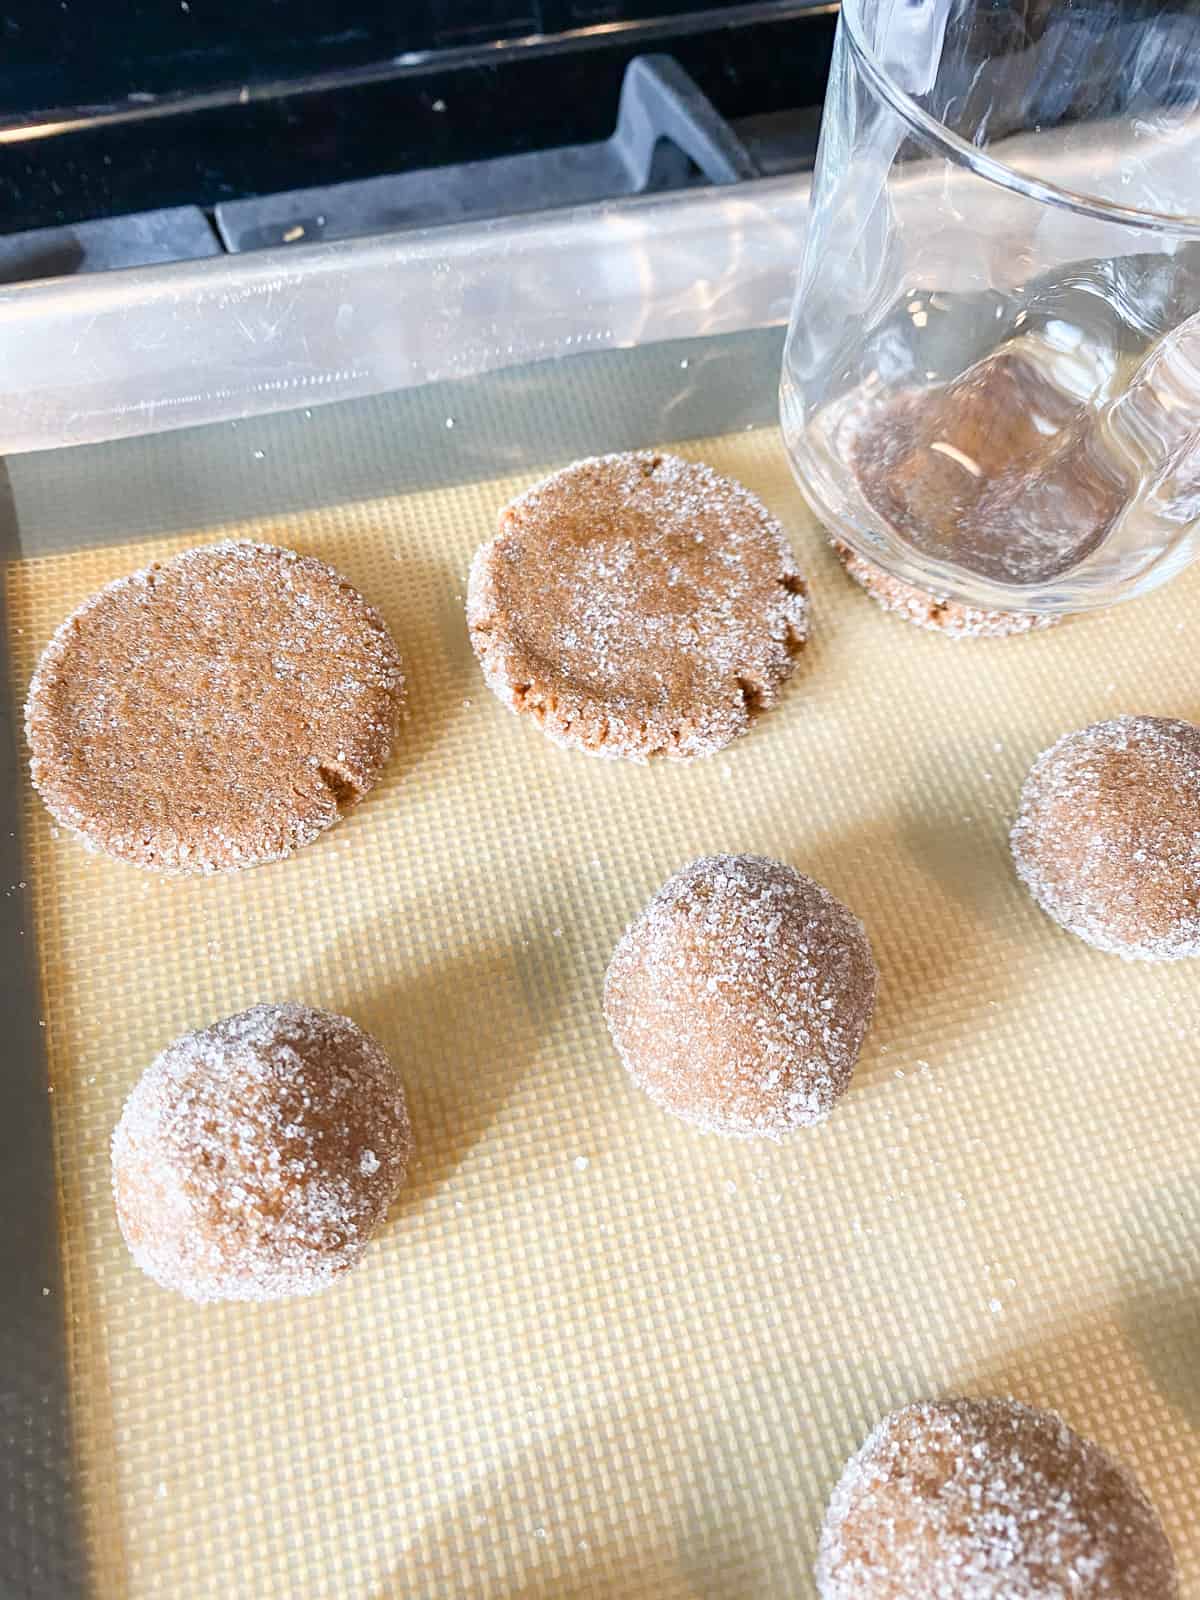 Cookie dough, rolled into balls and sugar; 2 balls are flattened into disks, with a small glass visible, which was used to flatten the cookies.